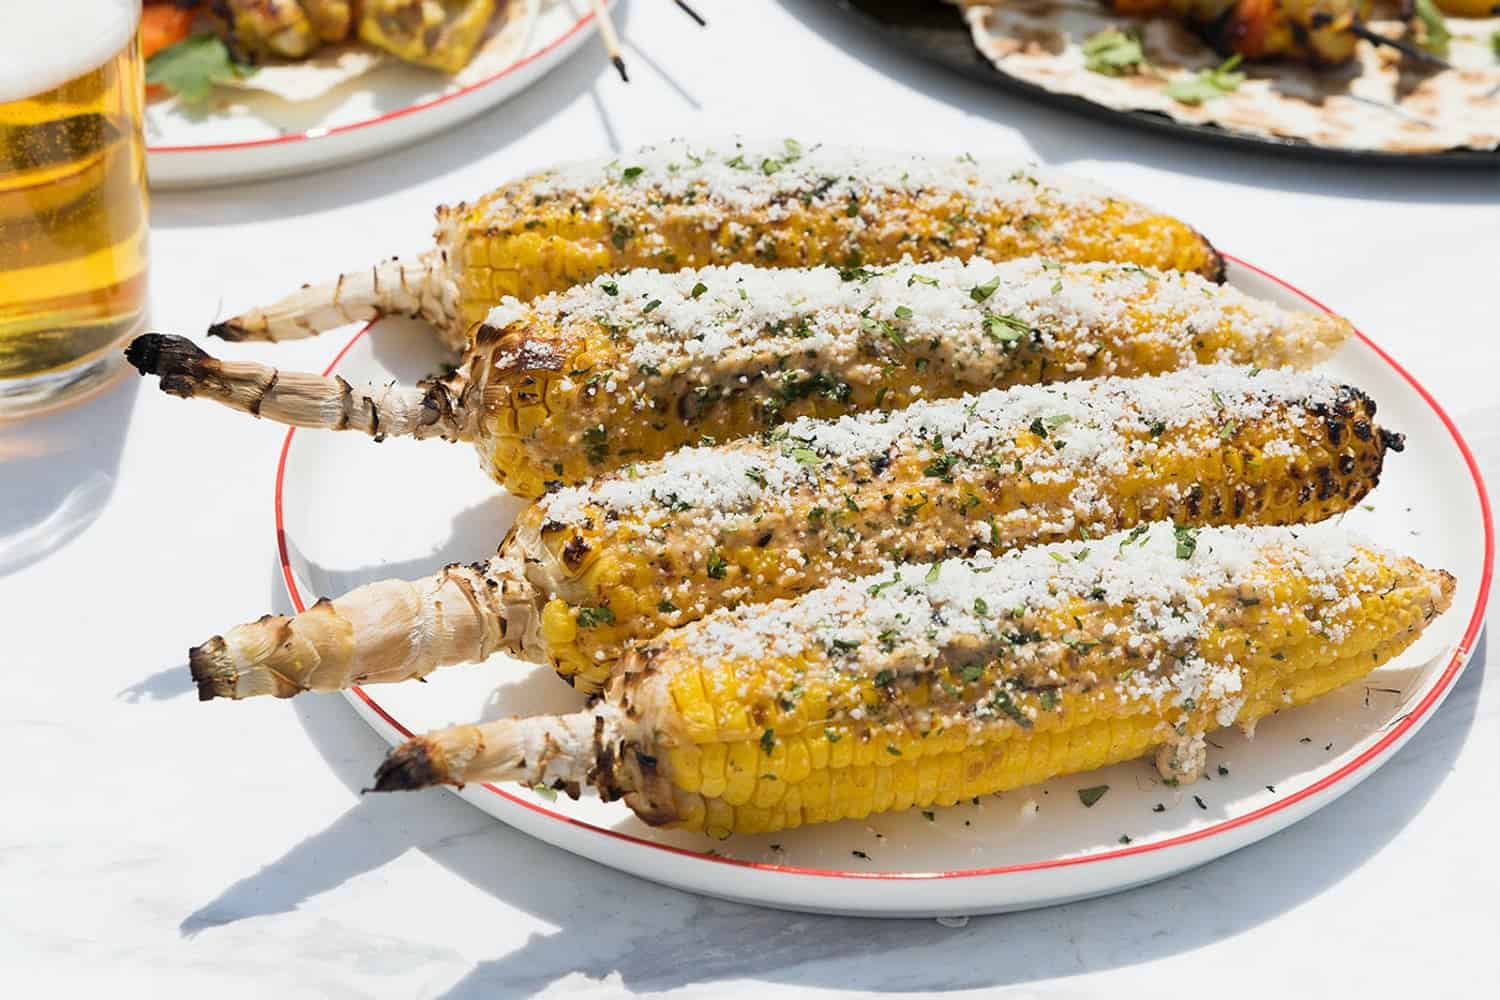 Grilled mexican street corn